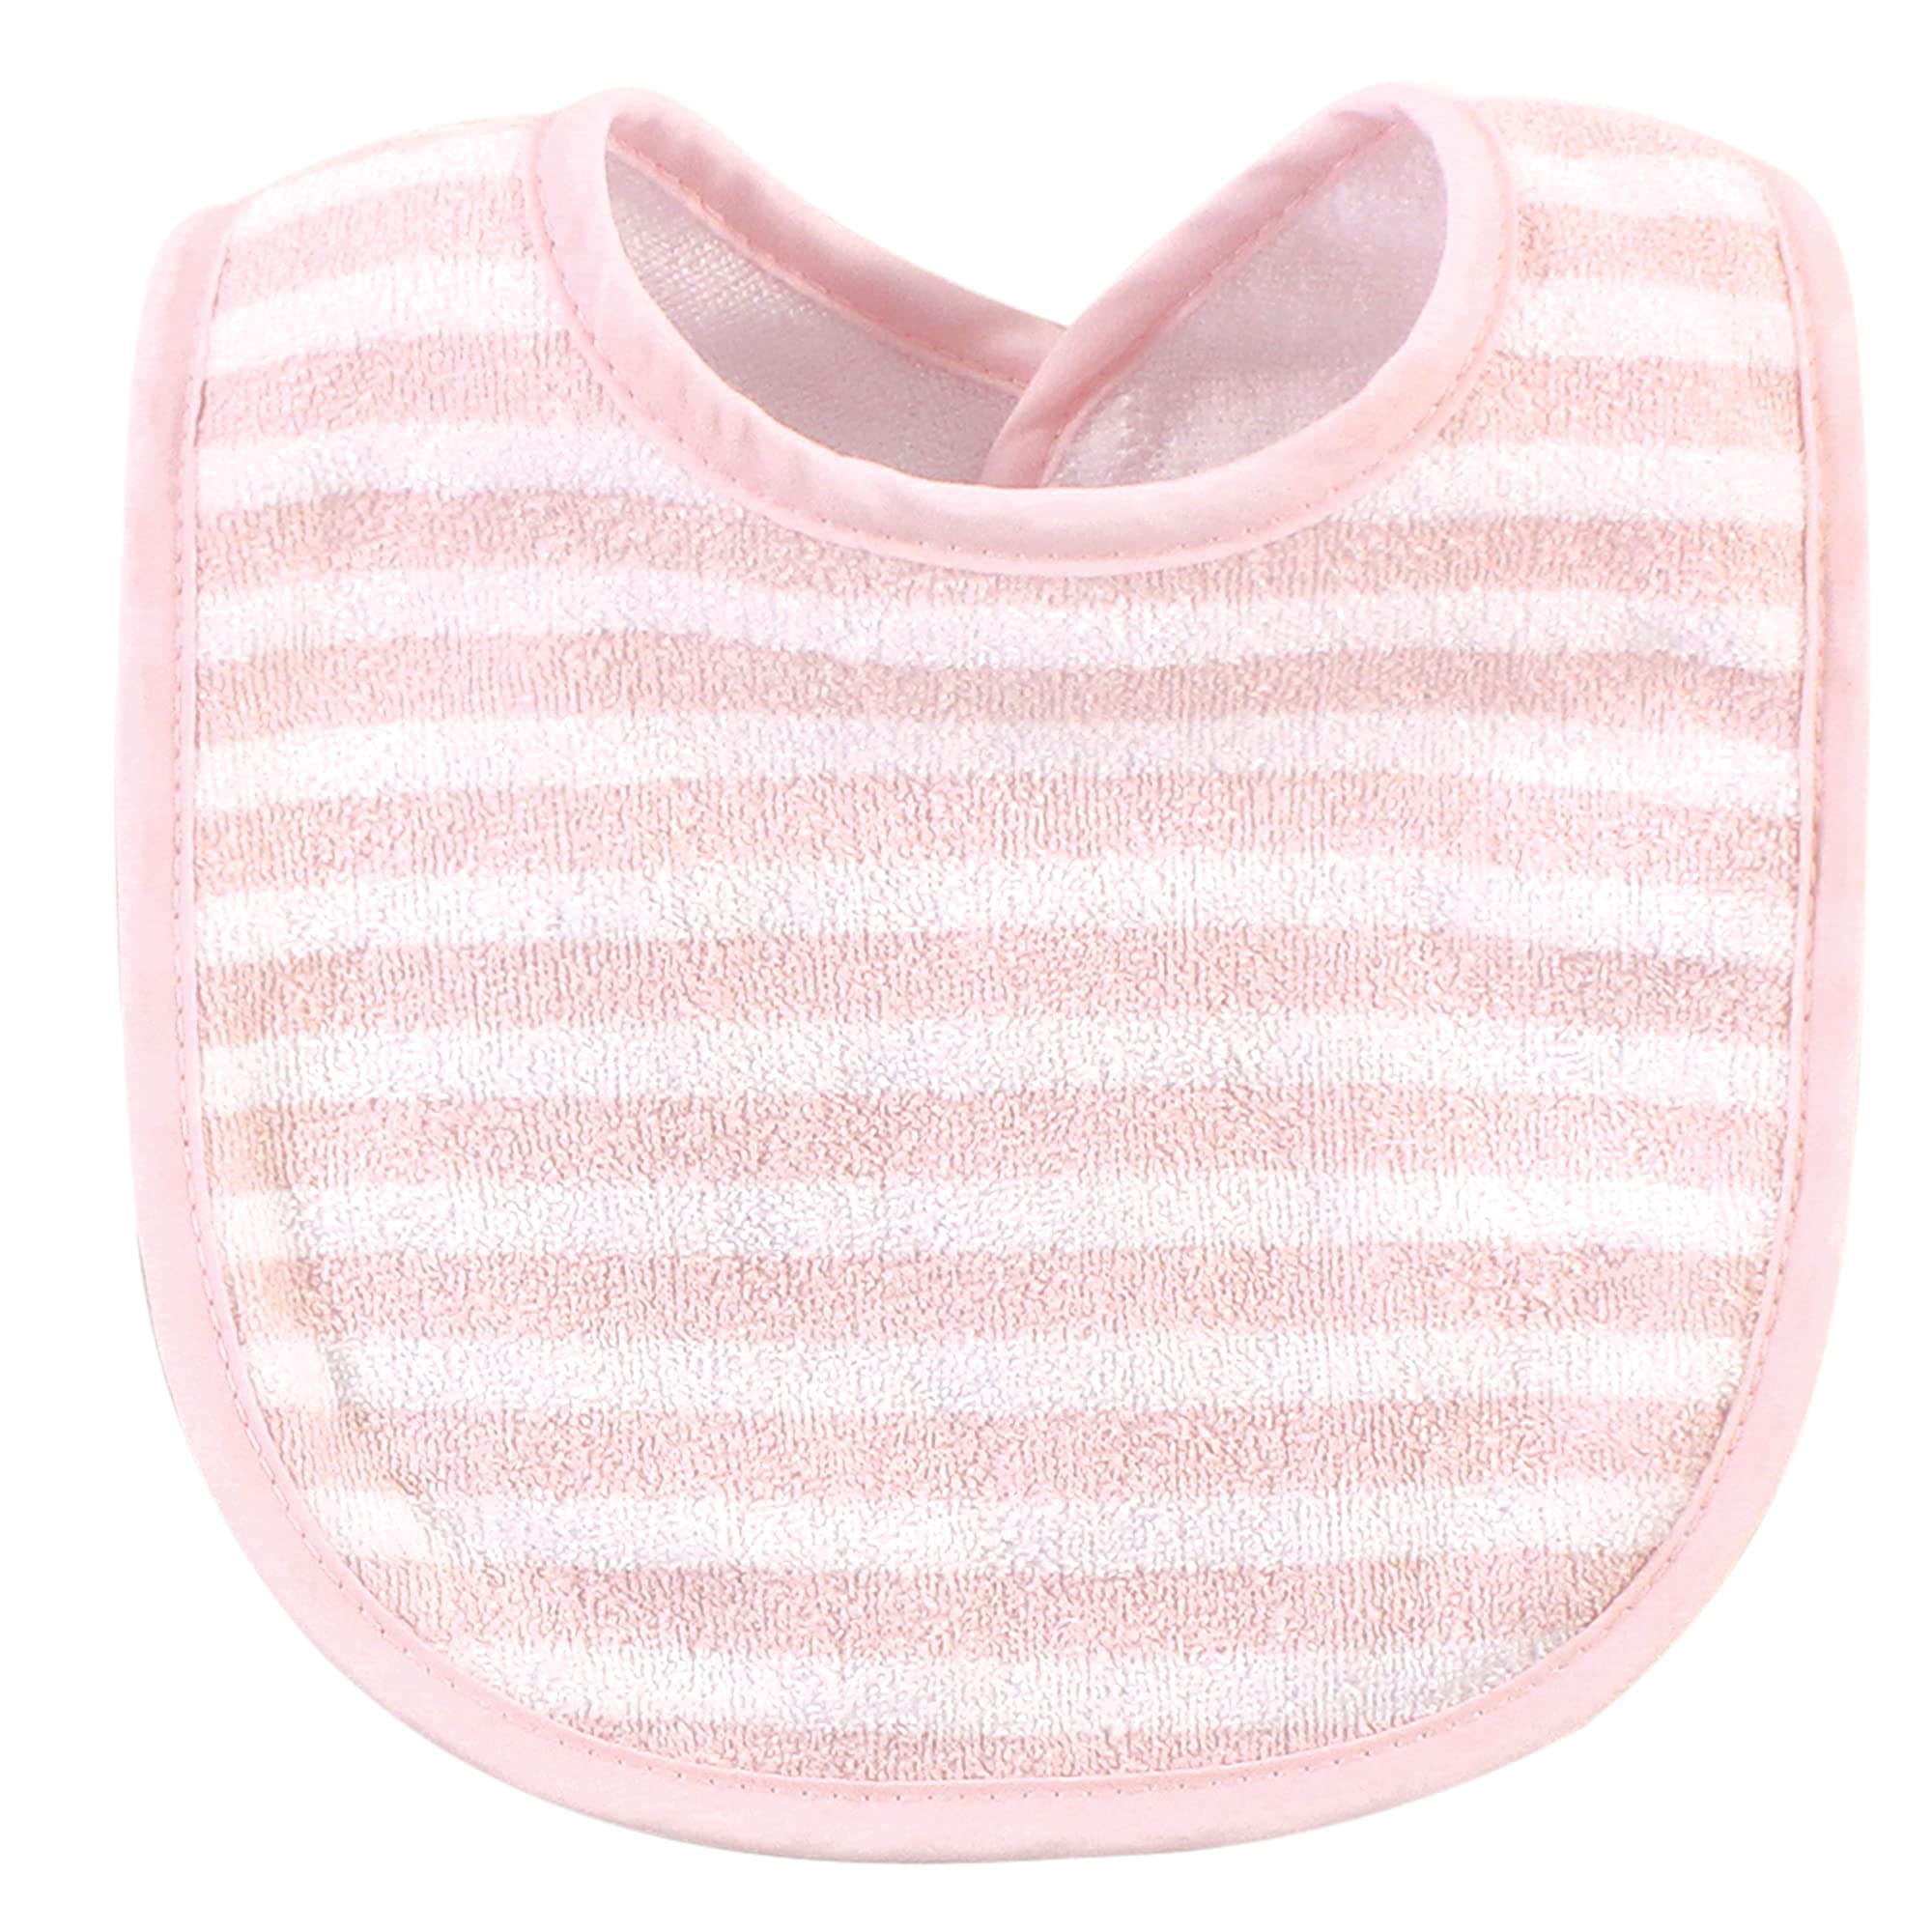 Hudson Baby unisex-baby Cotton and Polyester Bibs